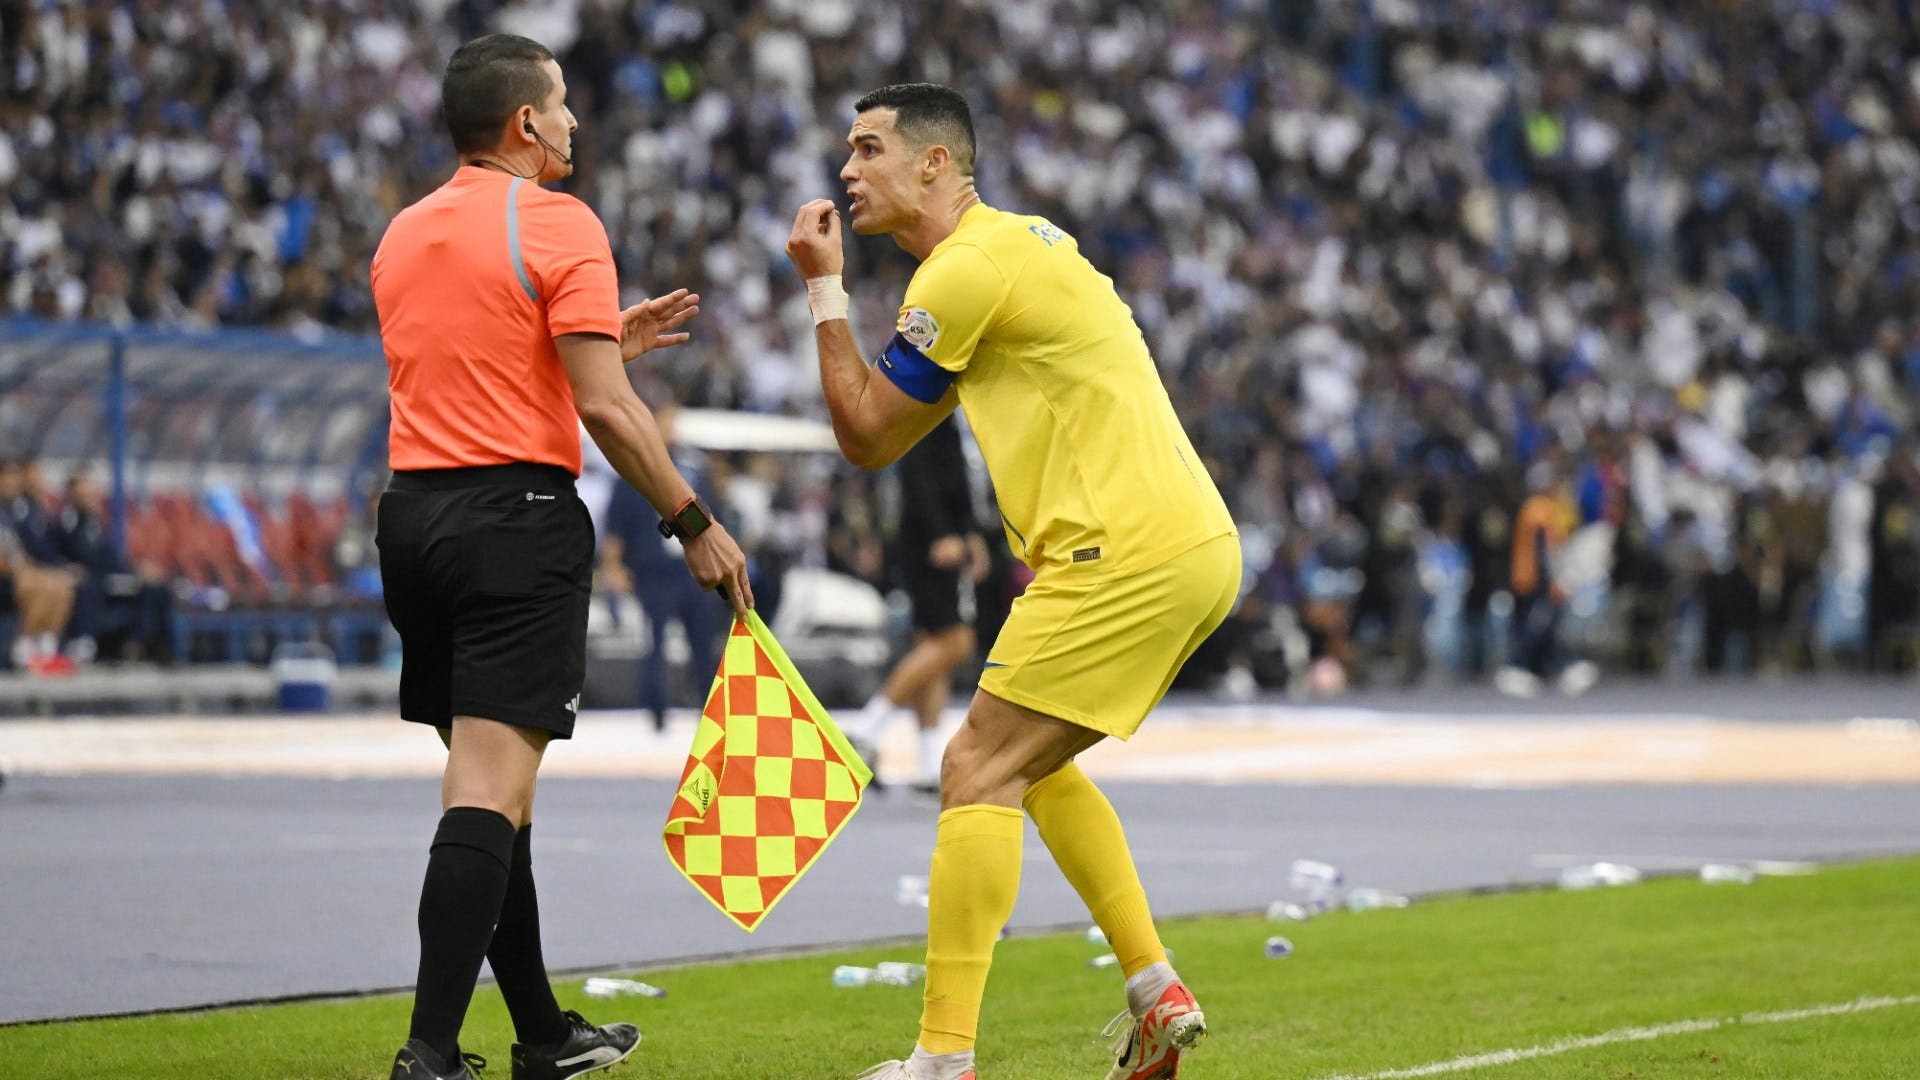 WATCH: Seething Cristiano Ronaldo confronts Al-Hilal president in furious outburst after full-time whistle of Al-Nassr's first league defeat of the season